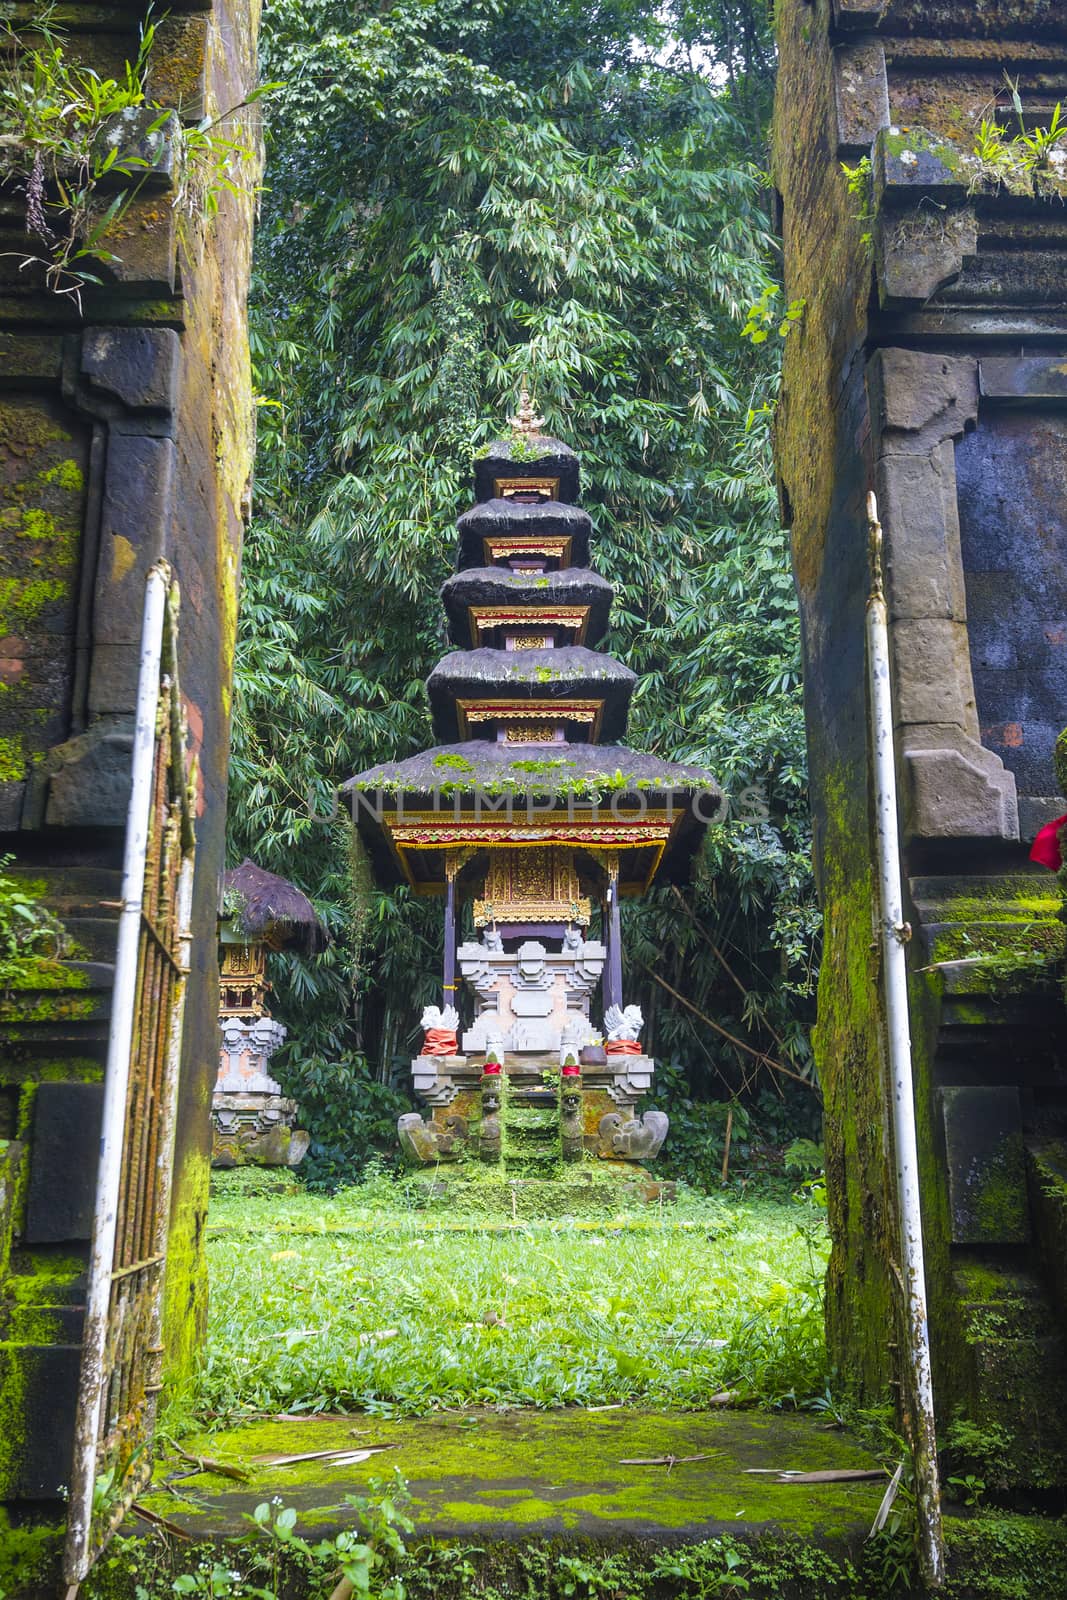 Bali temple at Ubud, Indonesia by truphoto